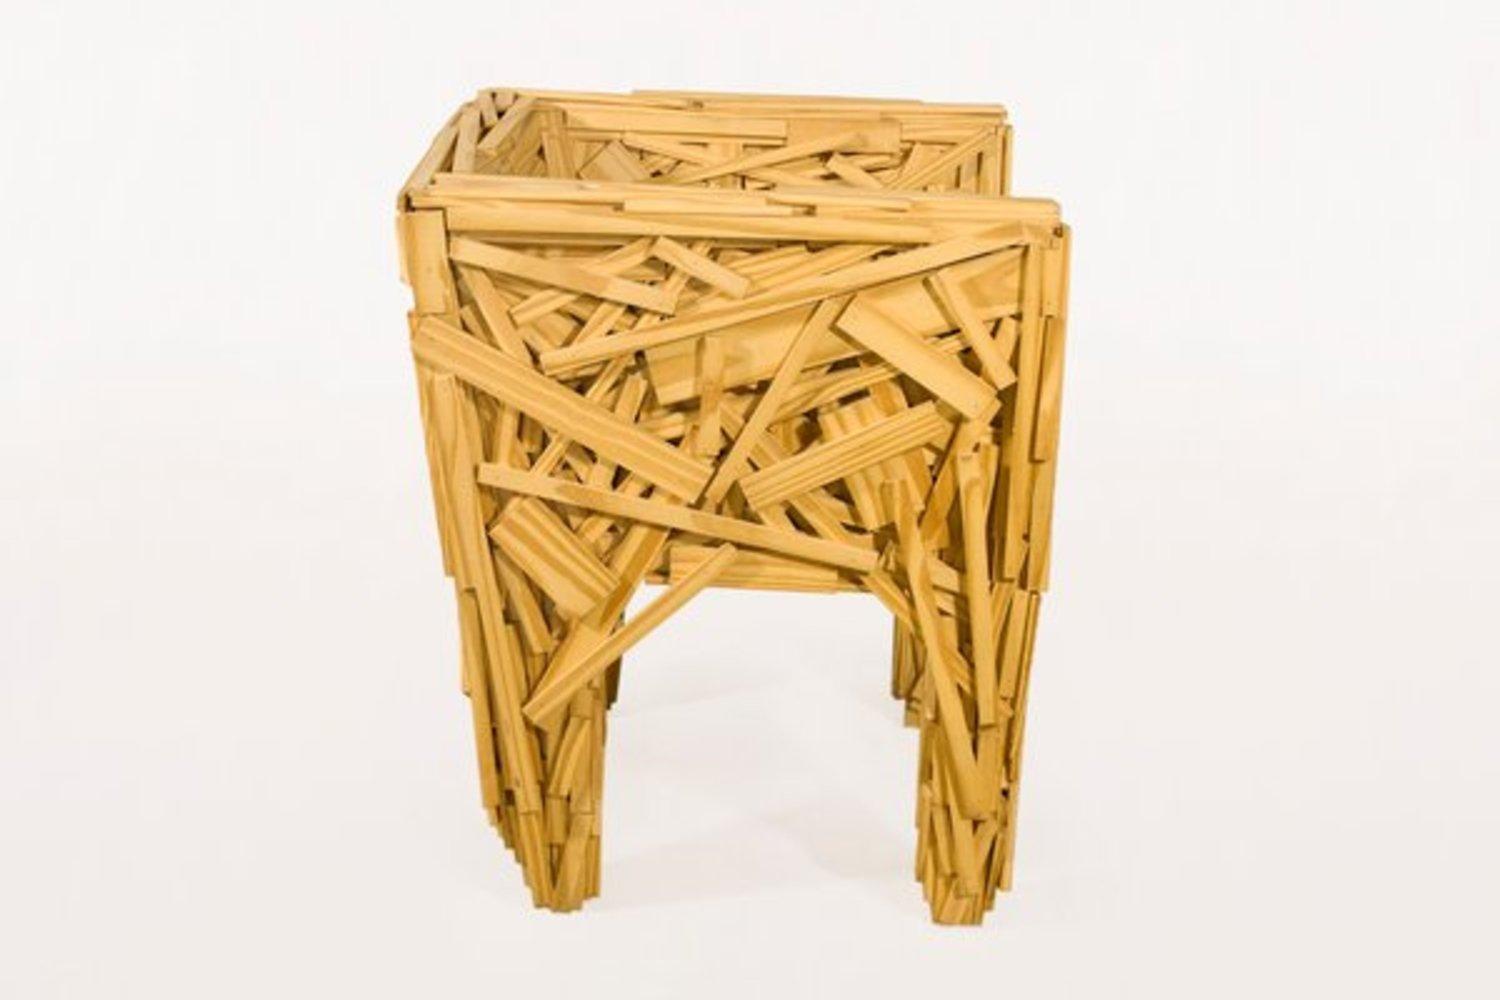 Favela armchair in pine wood by Humberto & Fernando Campana.
Edra production, 2003, Italy.
Excellent condition.